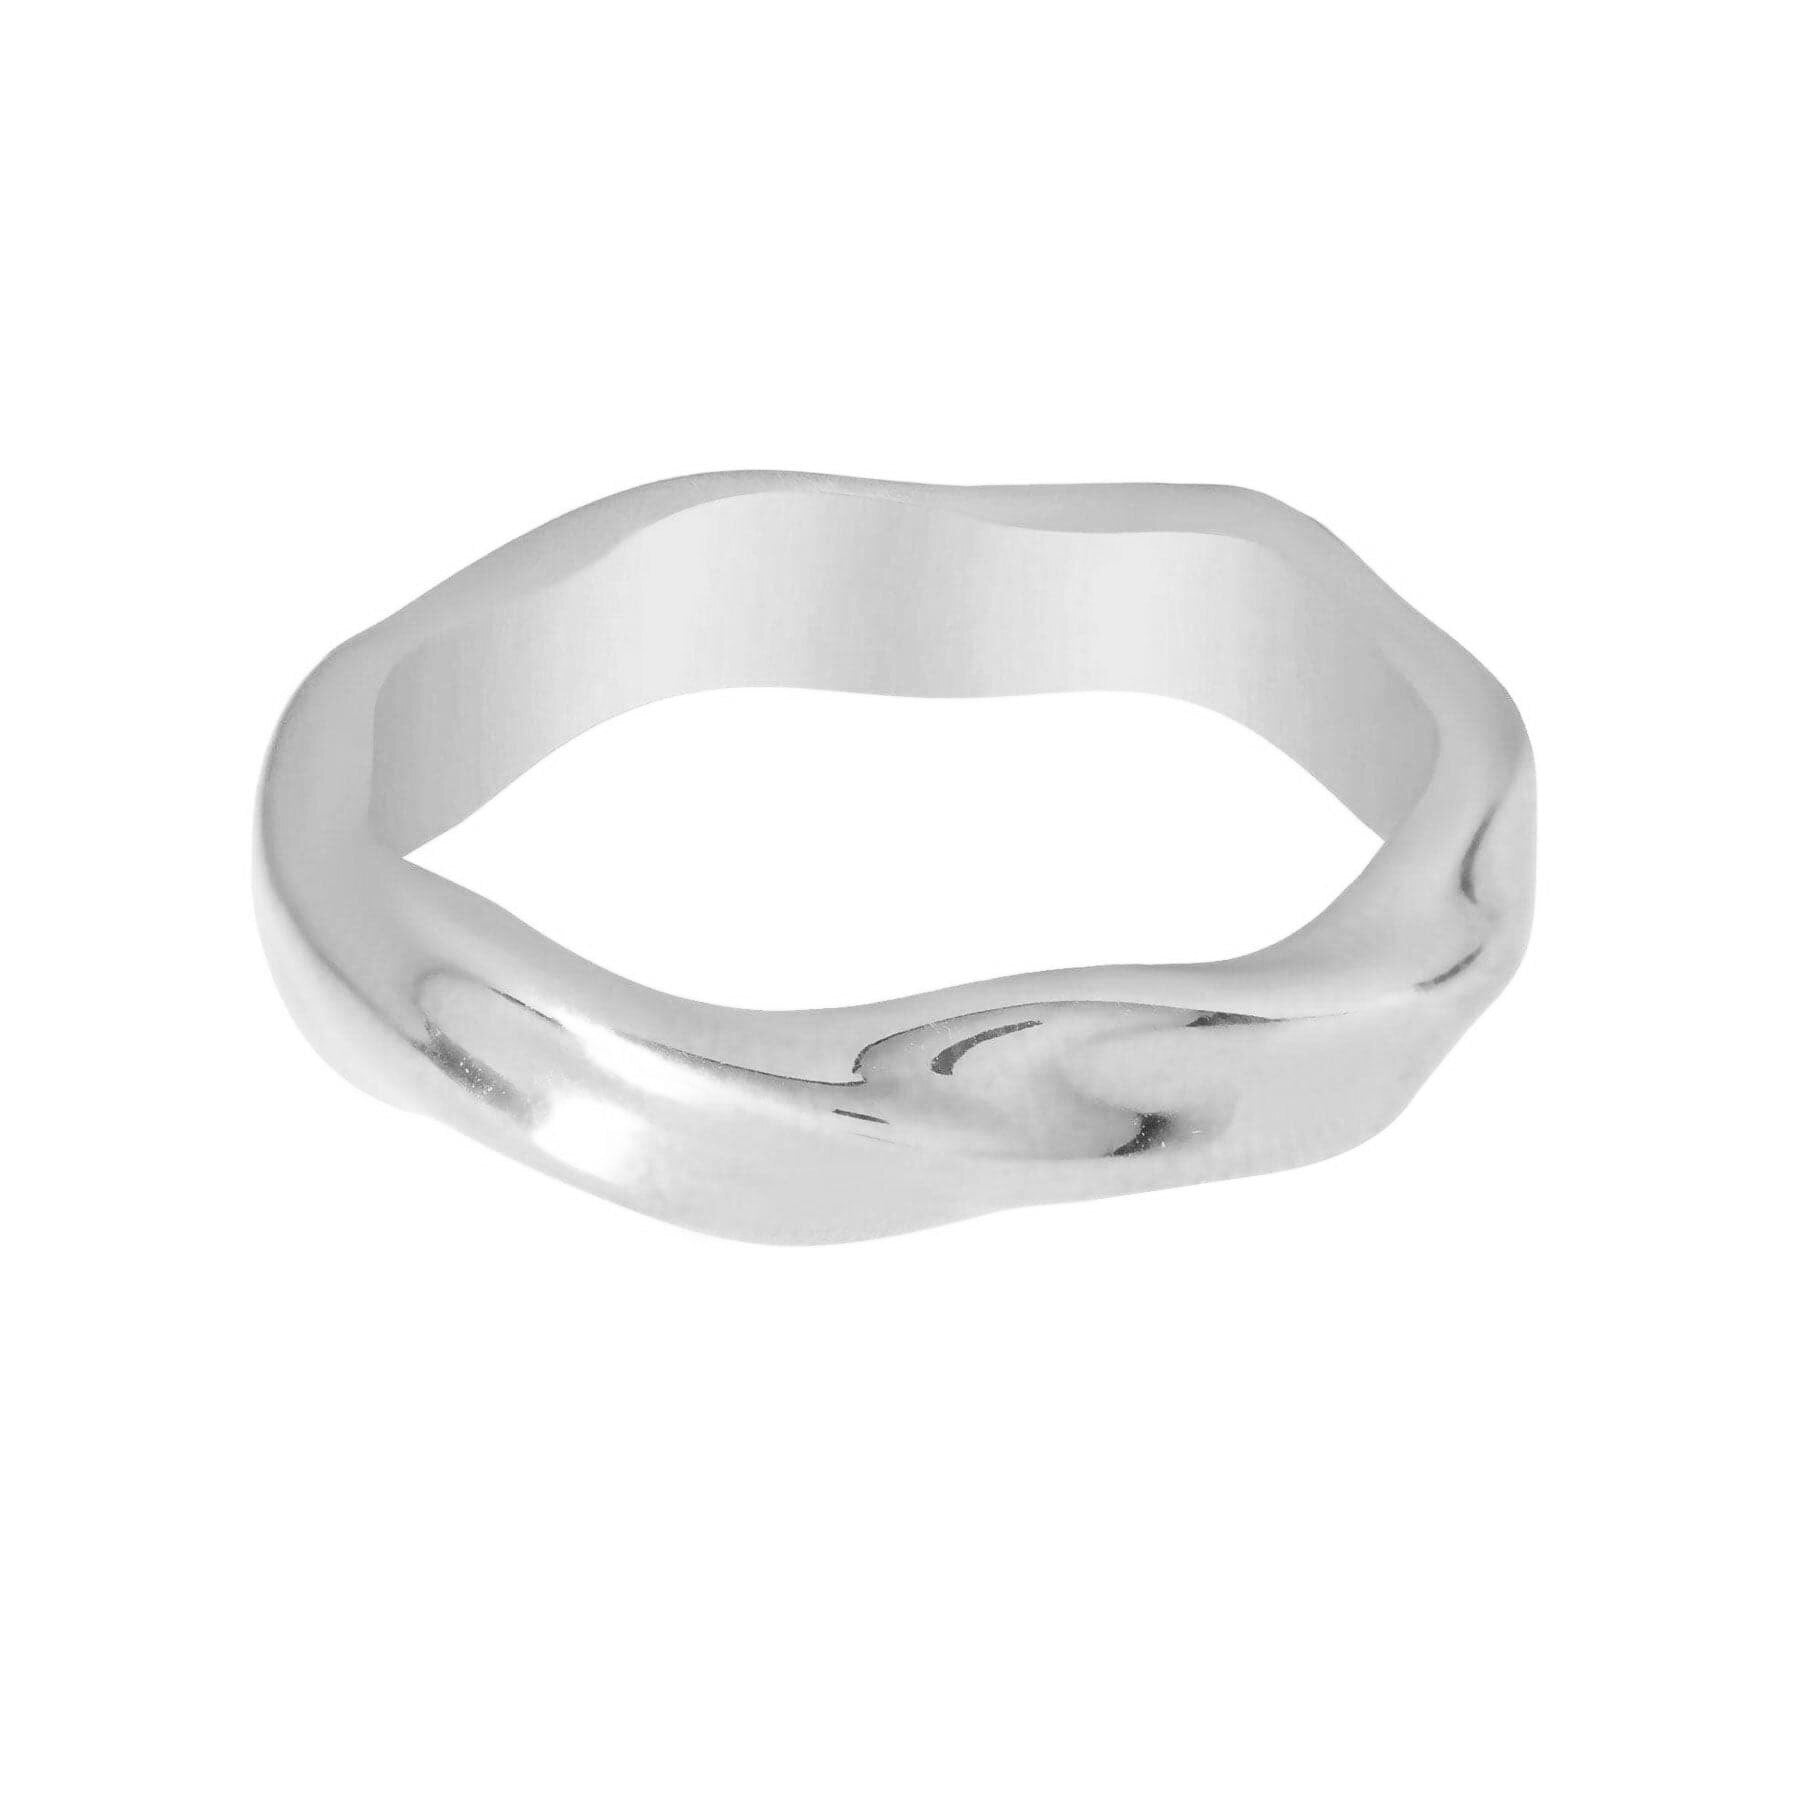 BohoMoon Stainless Steel Sage Ring Silver / US 5 / UK J / EUR 49 (x small)